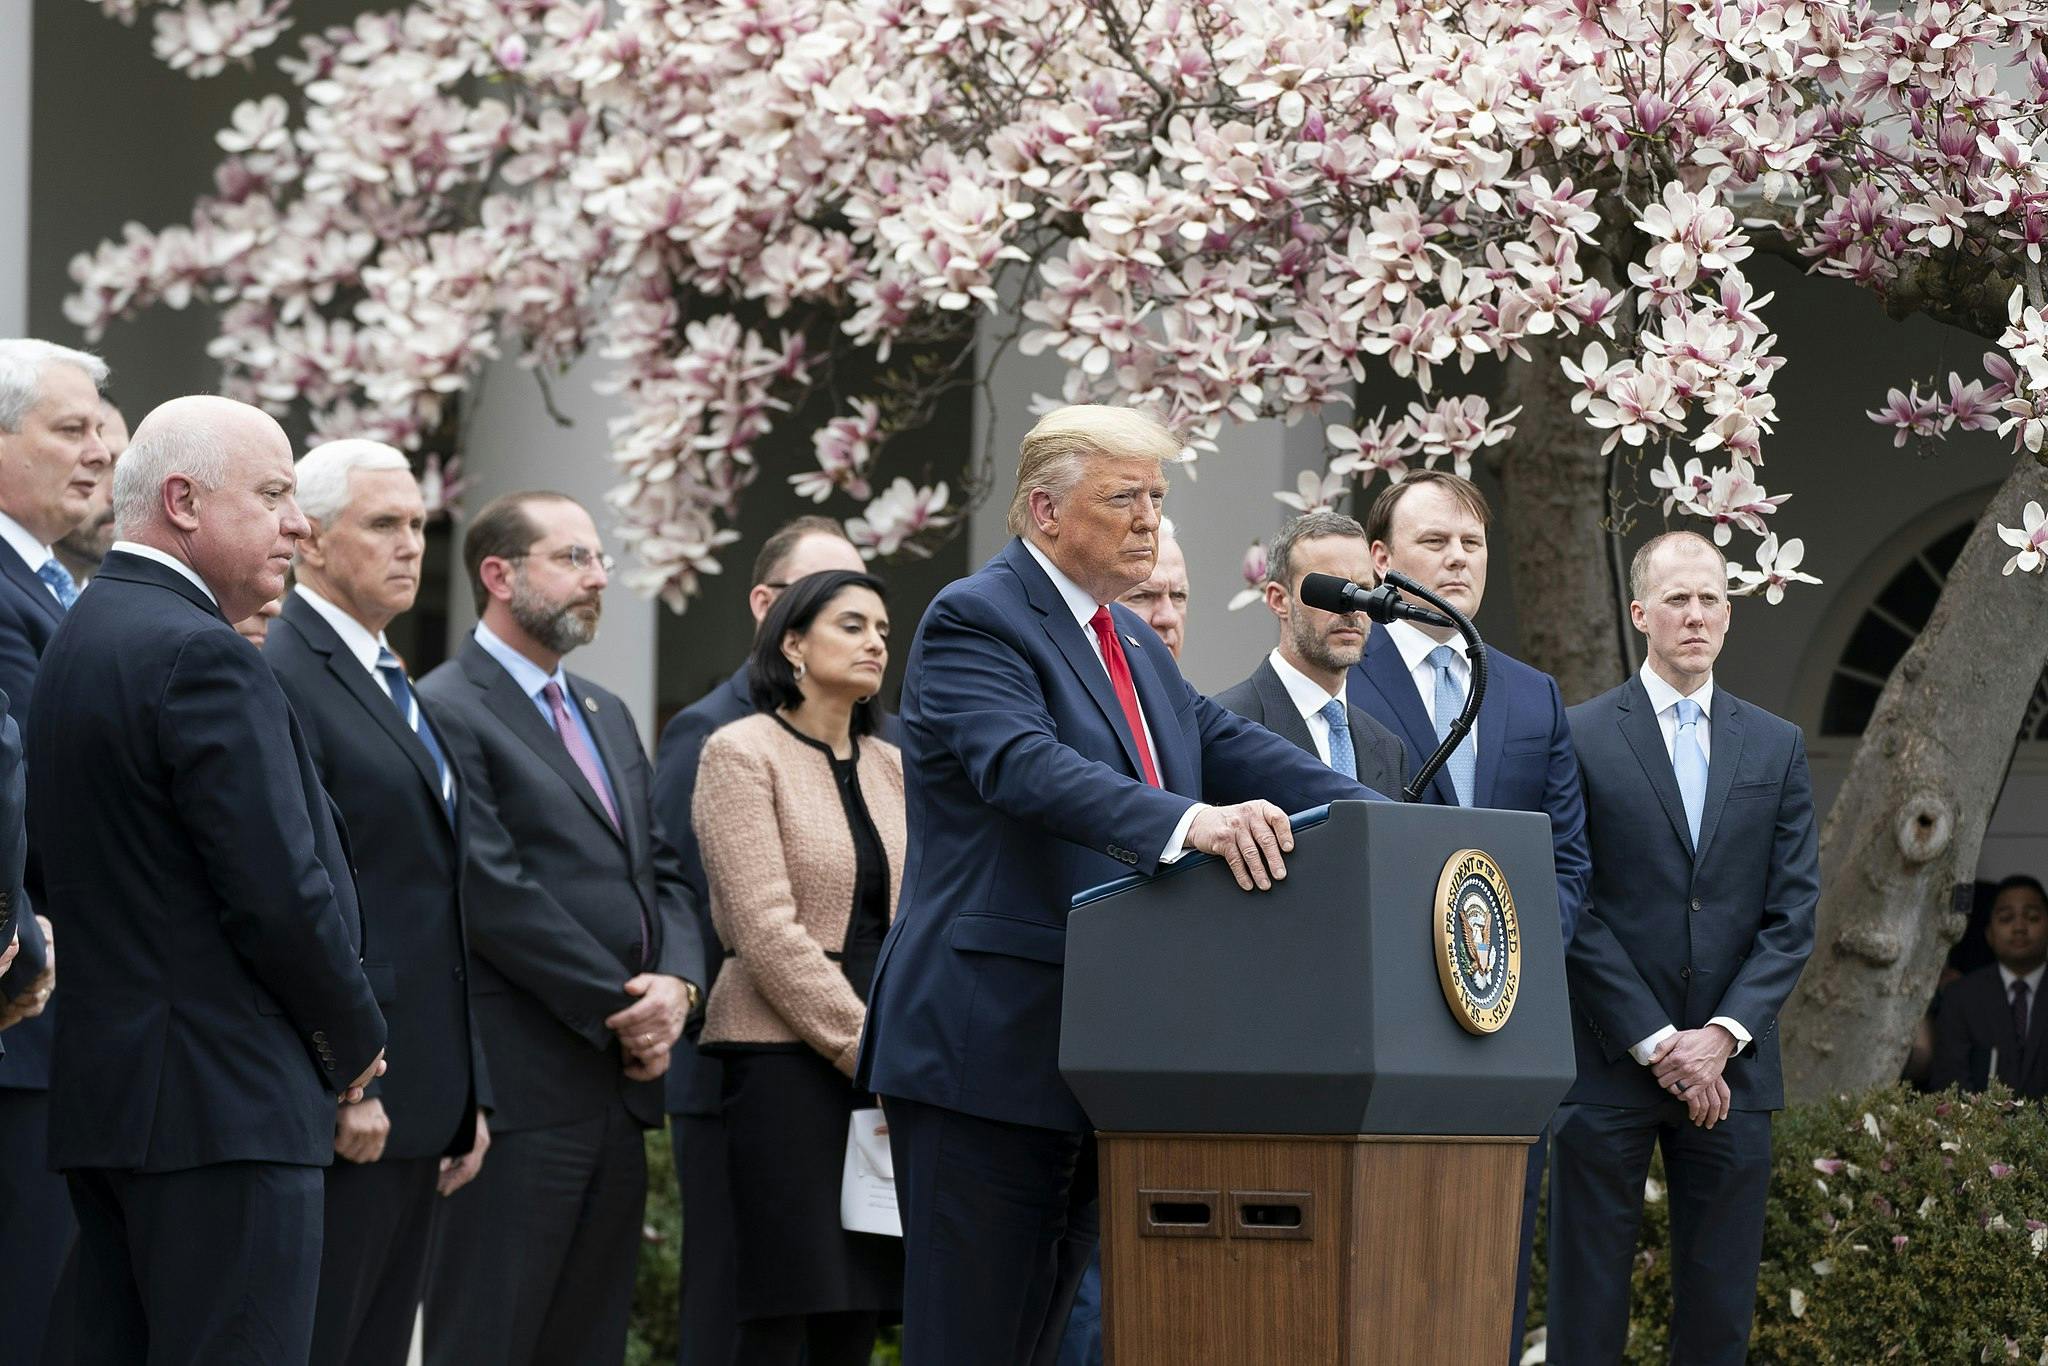 President Donald J. Trump listens to a reporter’s question after announcing a national emergency to further combat the Coronavirus outbreak, at a news conference Friday, March 13, 2020, in the Rose Garden of the White House. (Official White House Photo by Shealah Craighead)